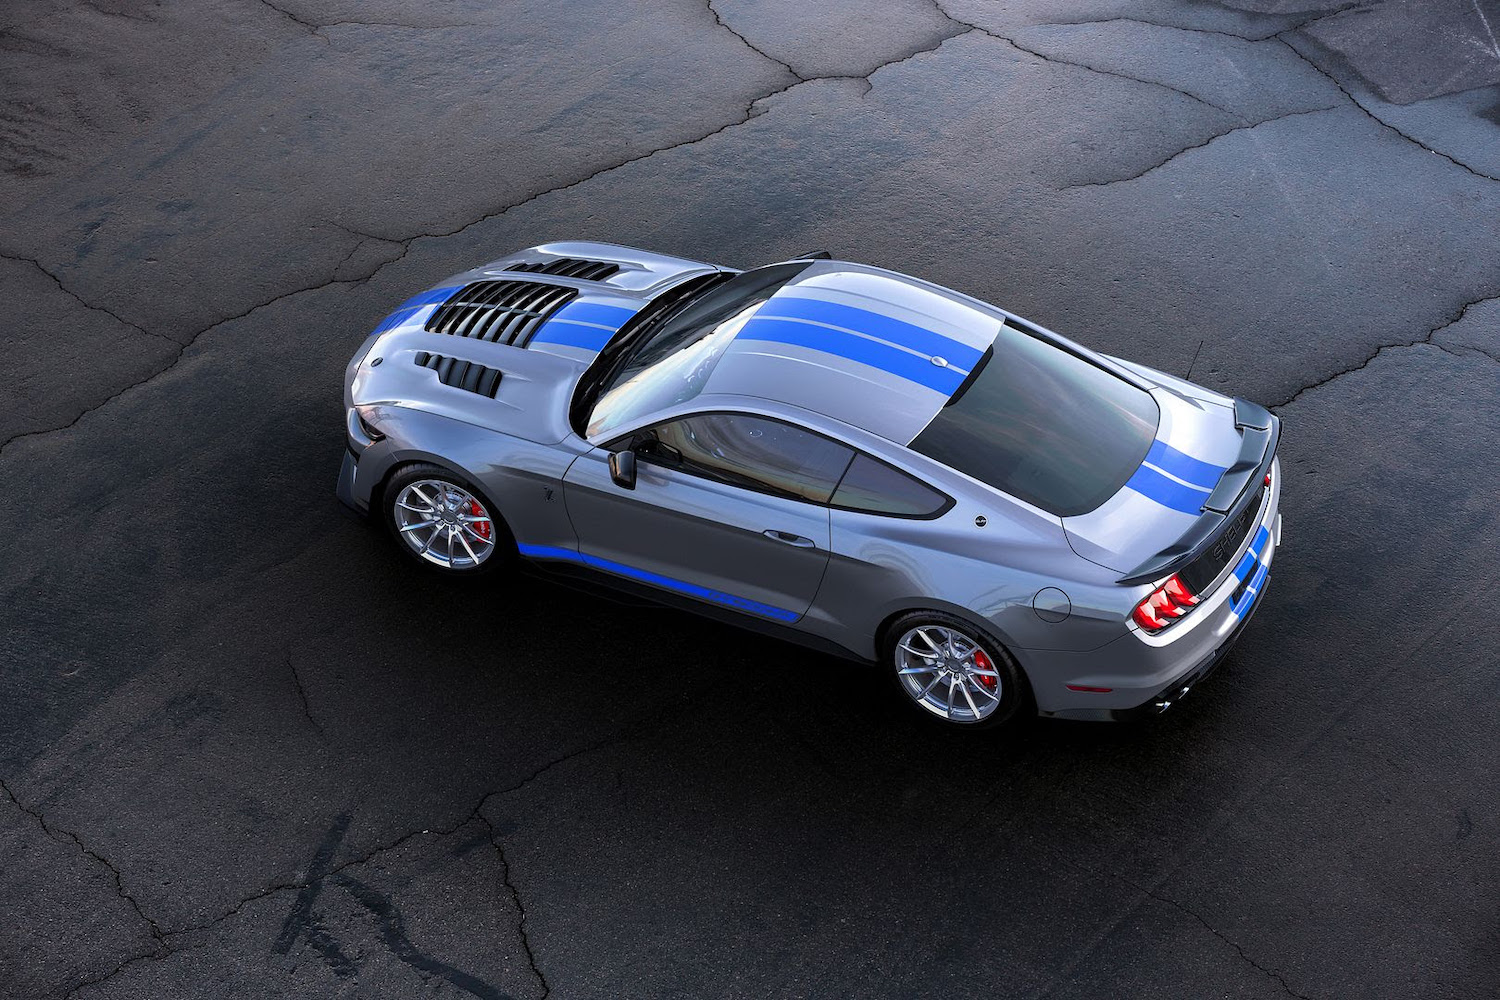 Ford Shelby Gt500kr Mustang Debuts As 60th Anniversary Tribute Model